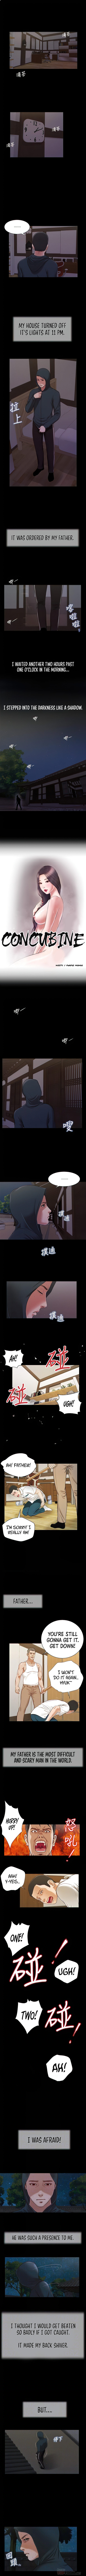 Concubine - Chapter 9 Page 2